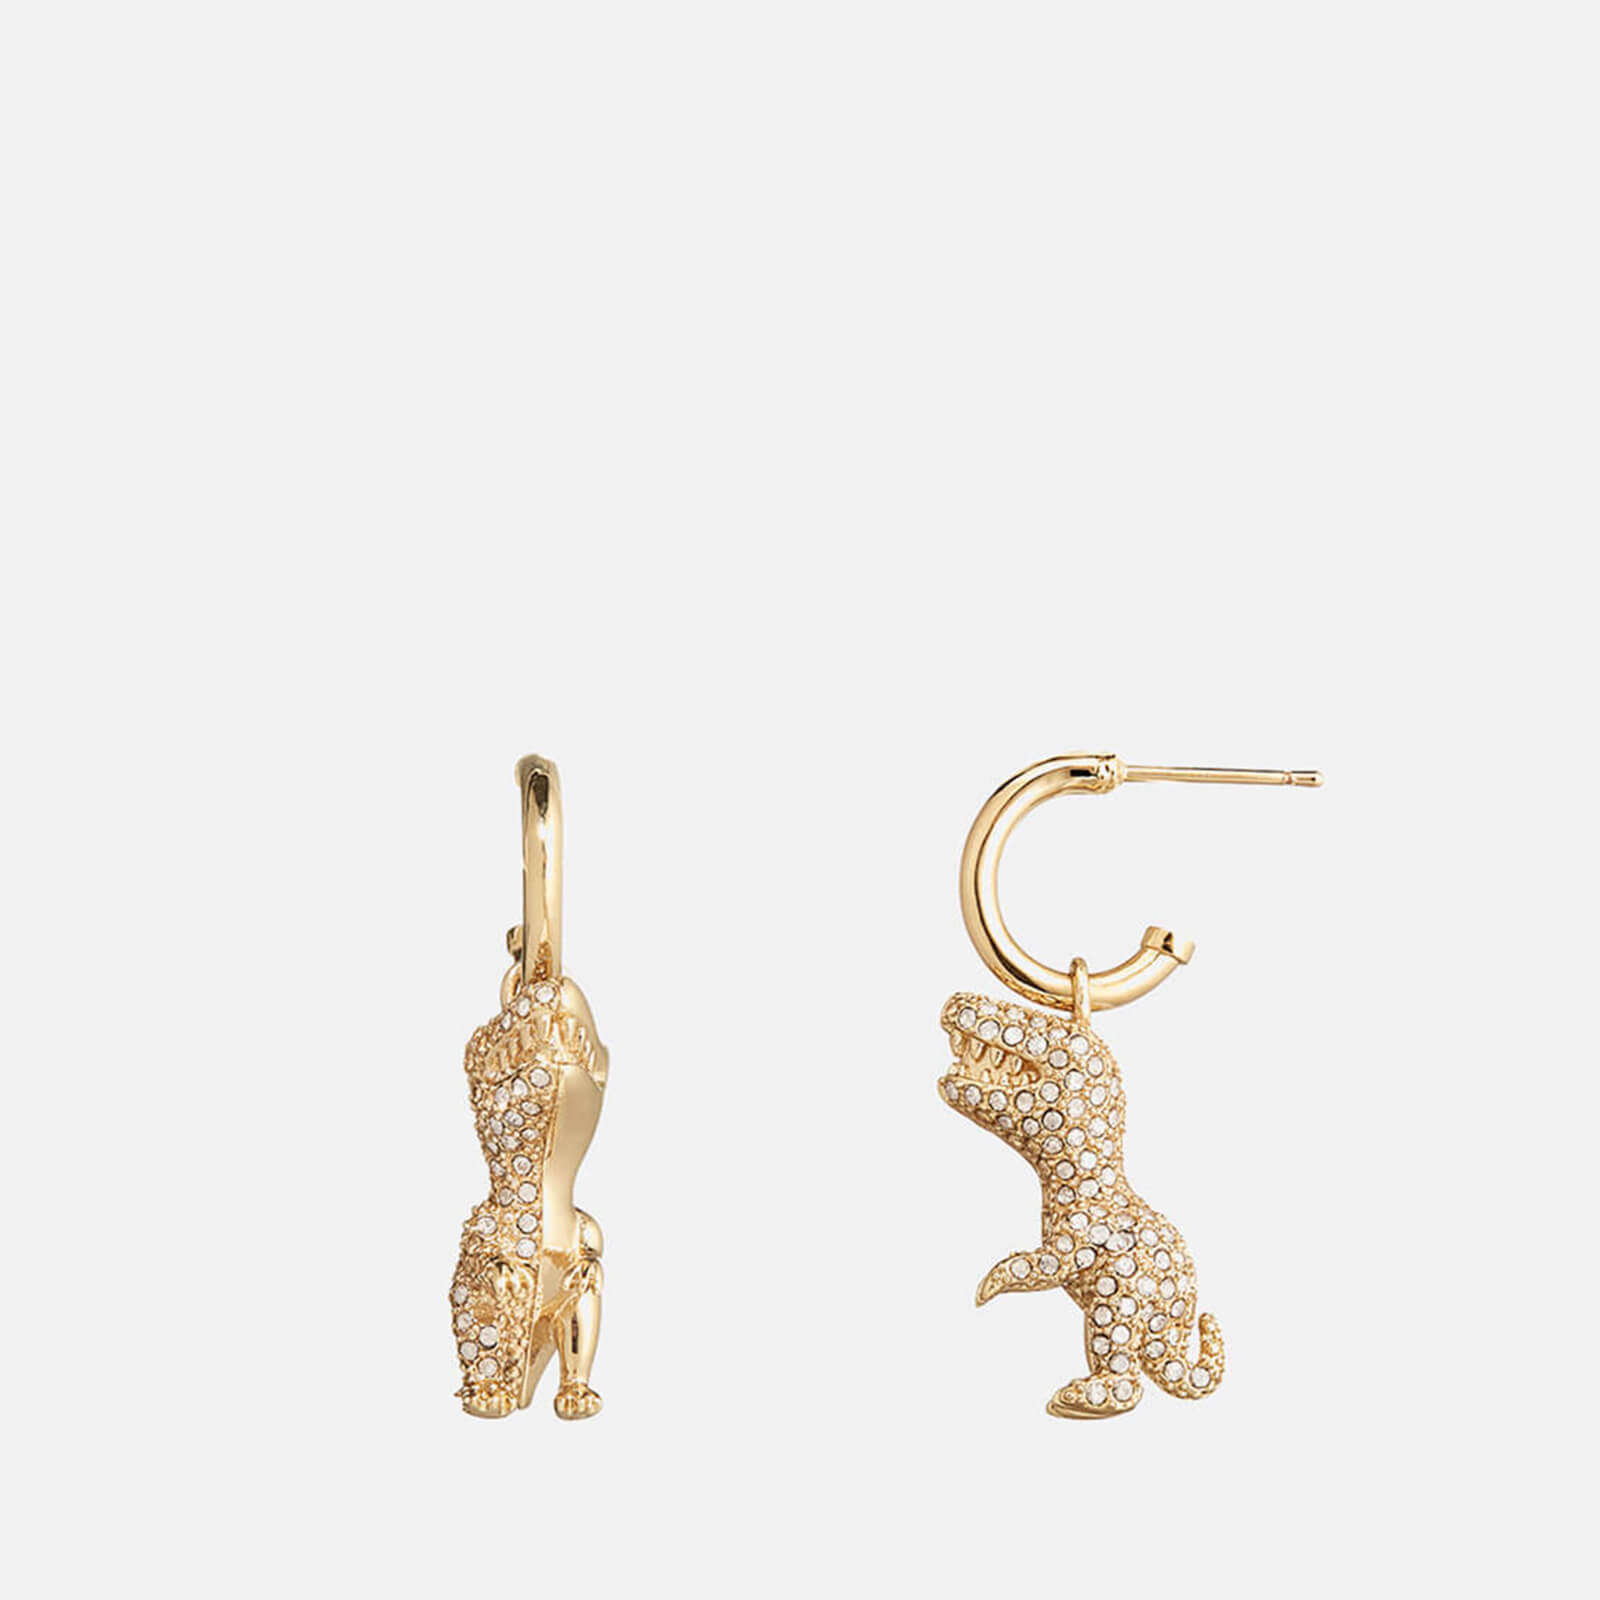 Coach Rexy Crystal and Gold-Tone Earrings von Coach